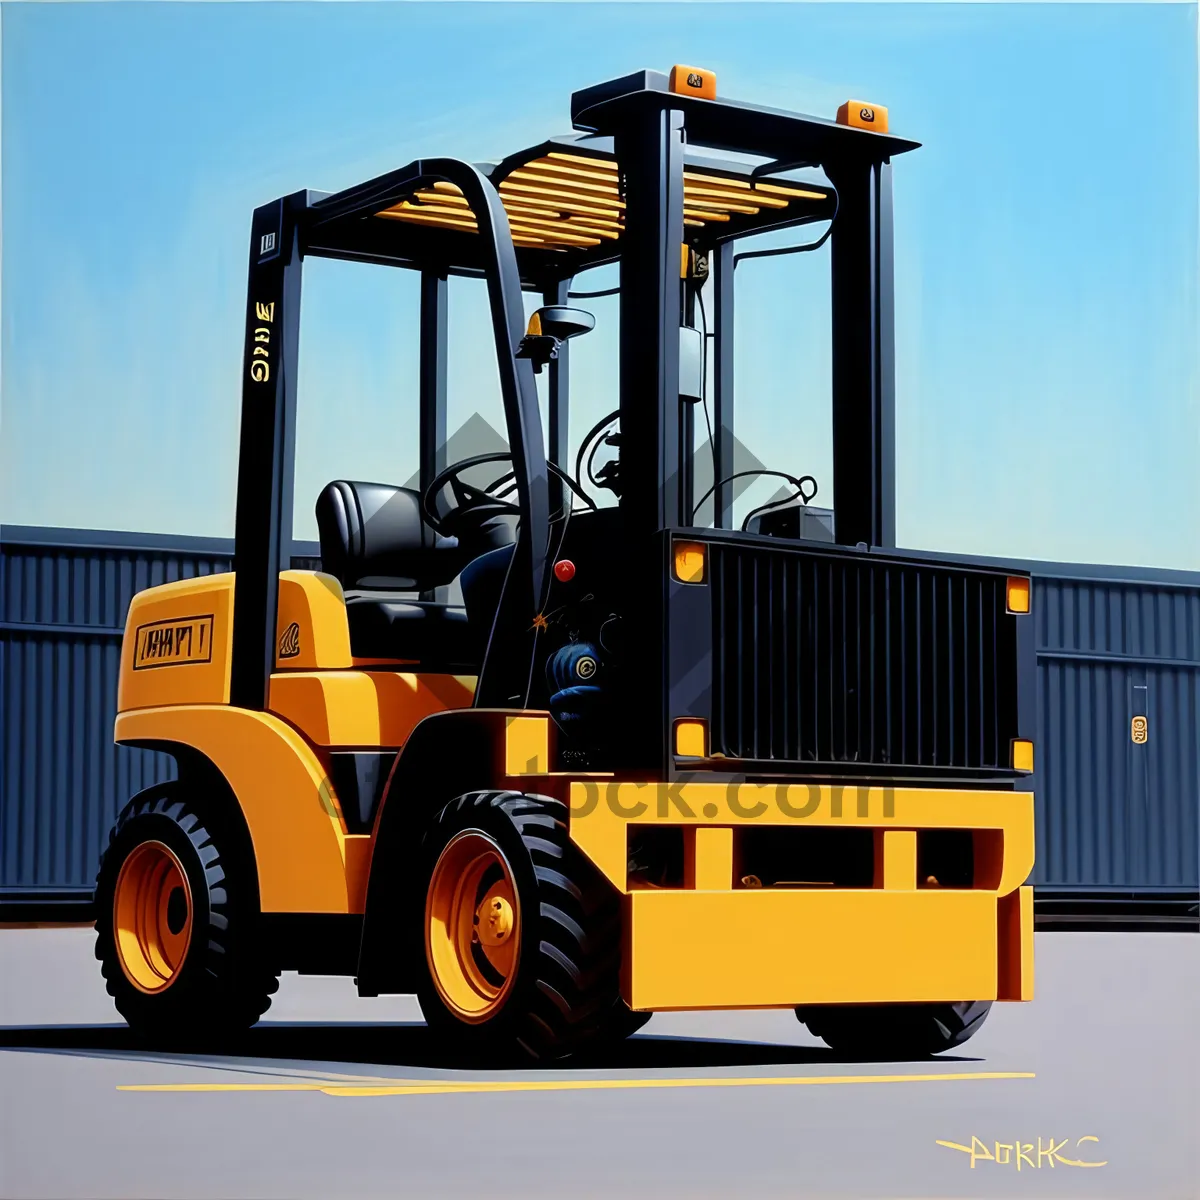 Picture of Yellow Industrial Forklift Truck with Wheel Loader